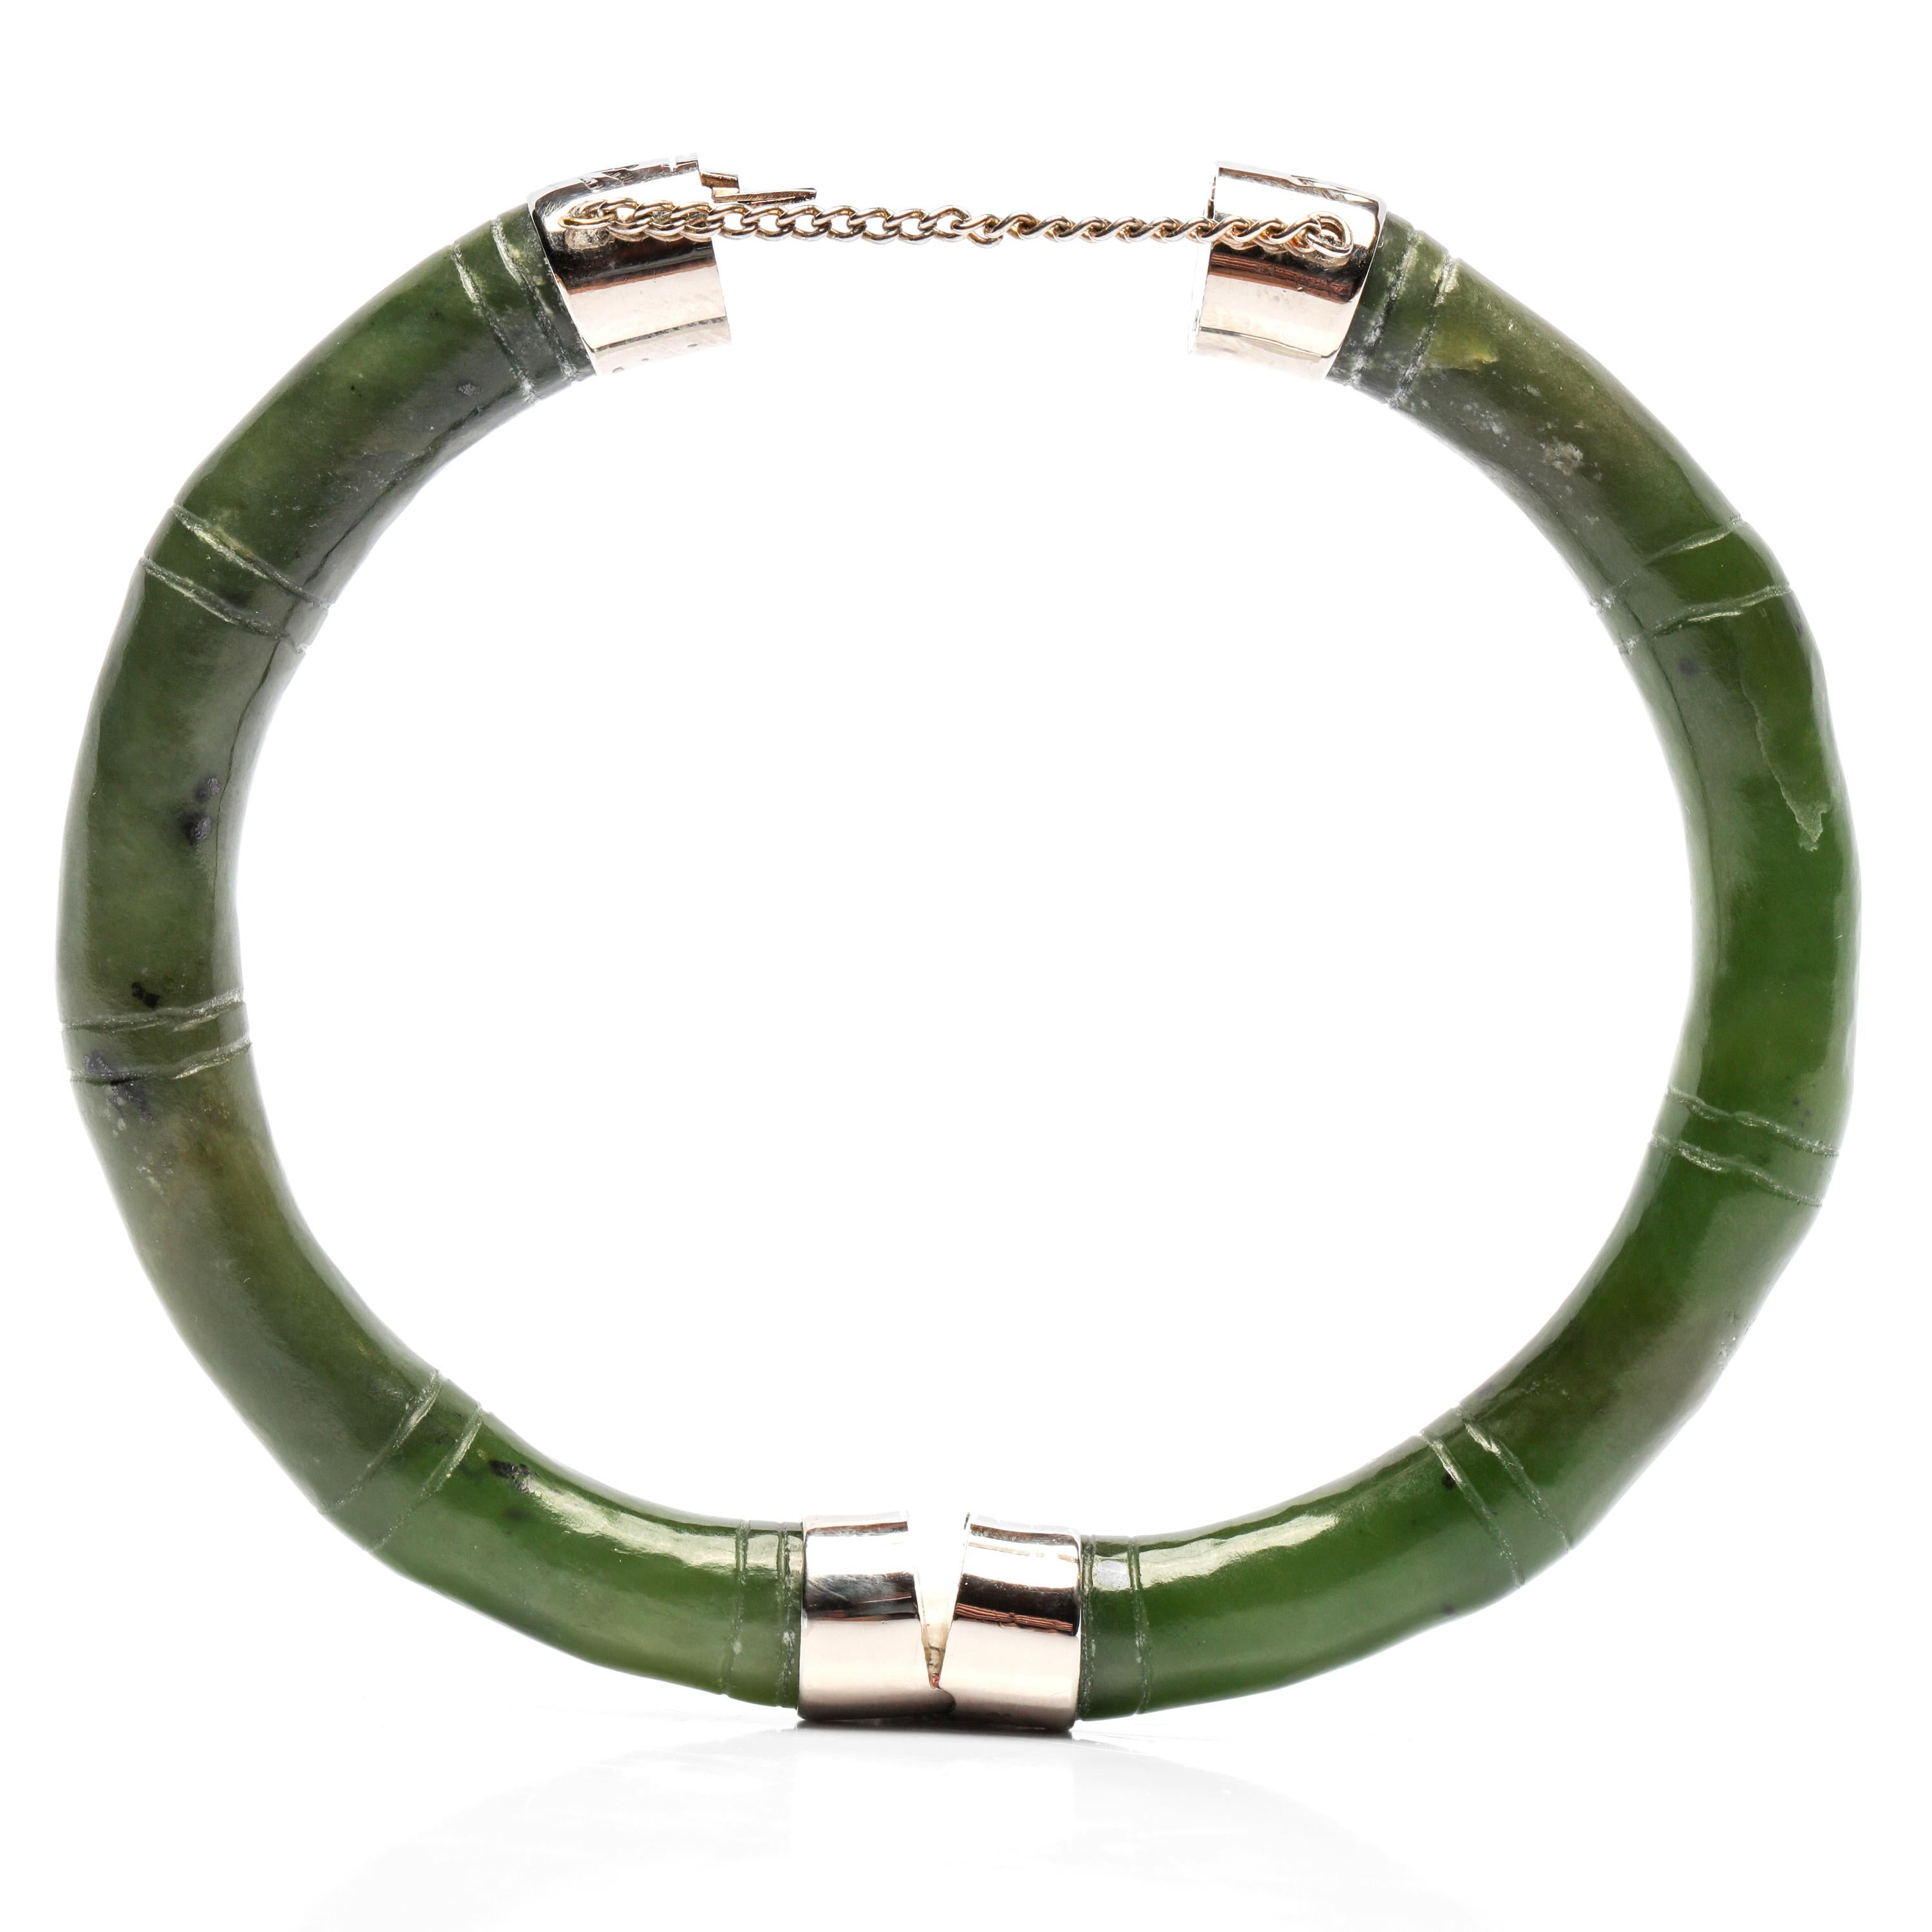 The polish of this bangle helps us to date it to the 1940s. The industrial revolution didn't reach China to the point of widespread saturation until the 1950s. Jade that was carved and polished prior to electricity and modern polishing equipment